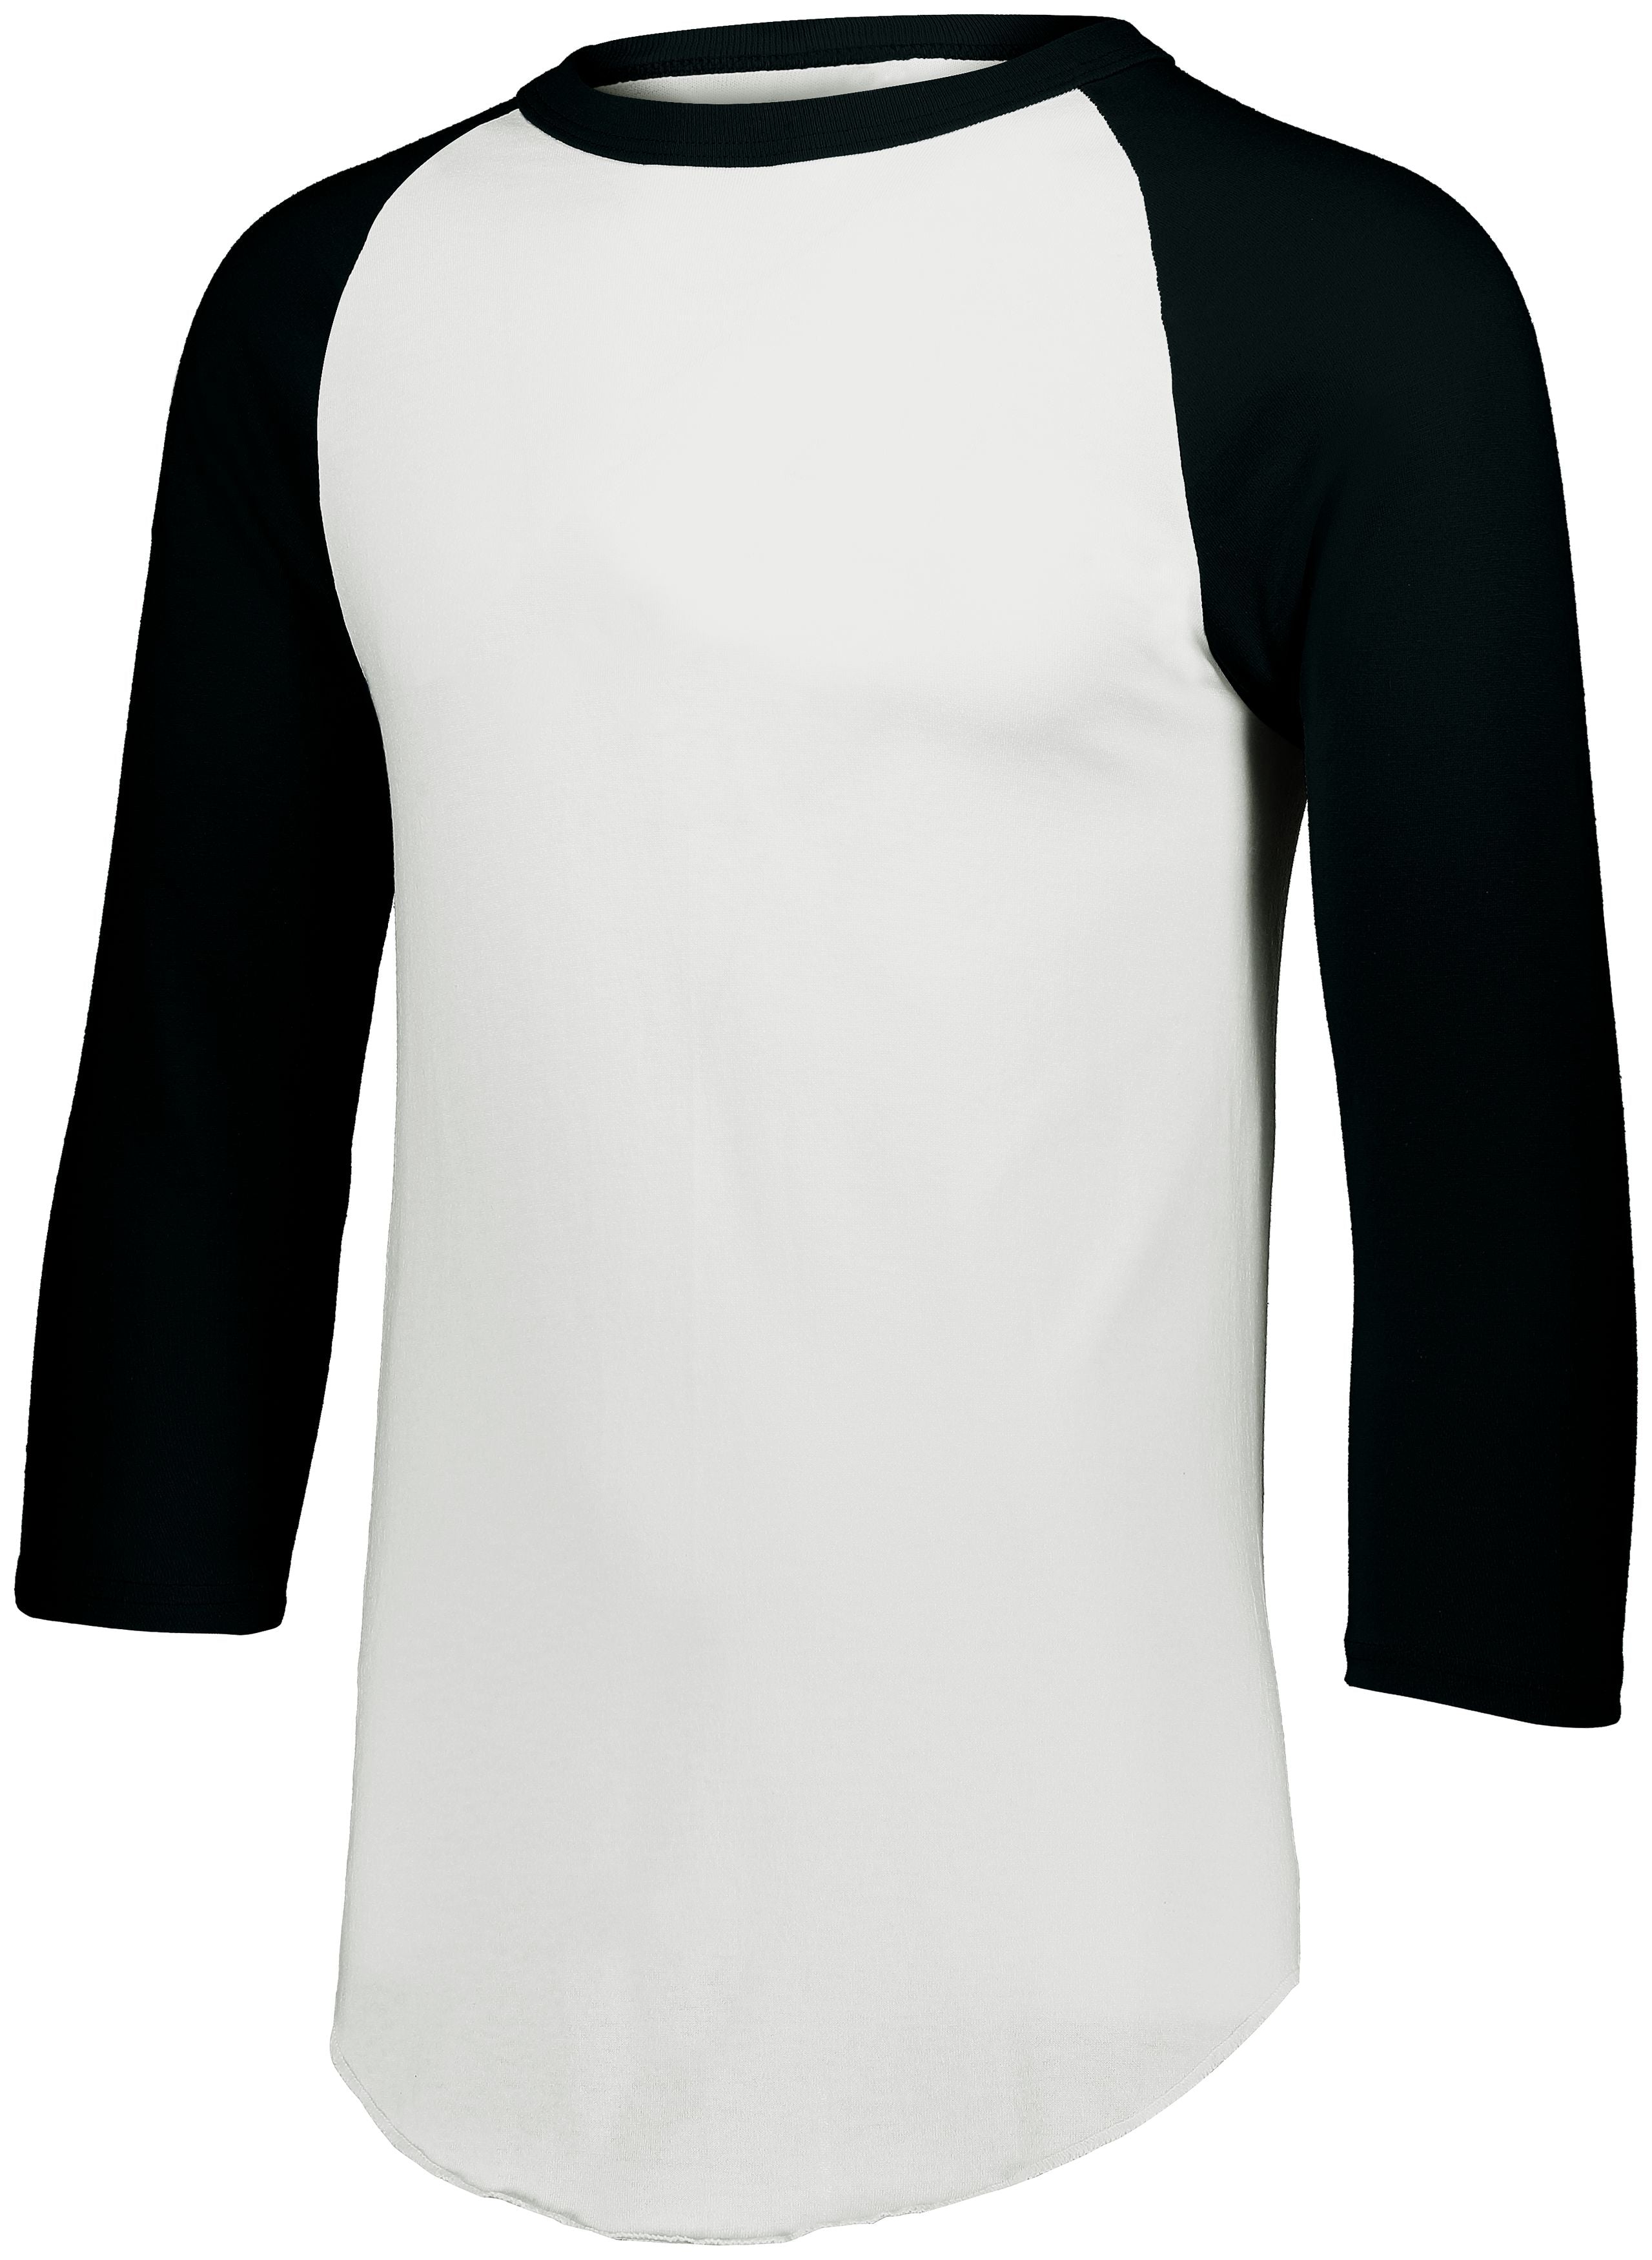 Augusta Sportswear Youth Baseball Jersey 2.0 in White/Black  -Part of the Youth, Youth-Jersey, Augusta-Products, Baseball, Shirts, All-Sports, All-Sports-1 product lines at KanaleyCreations.com